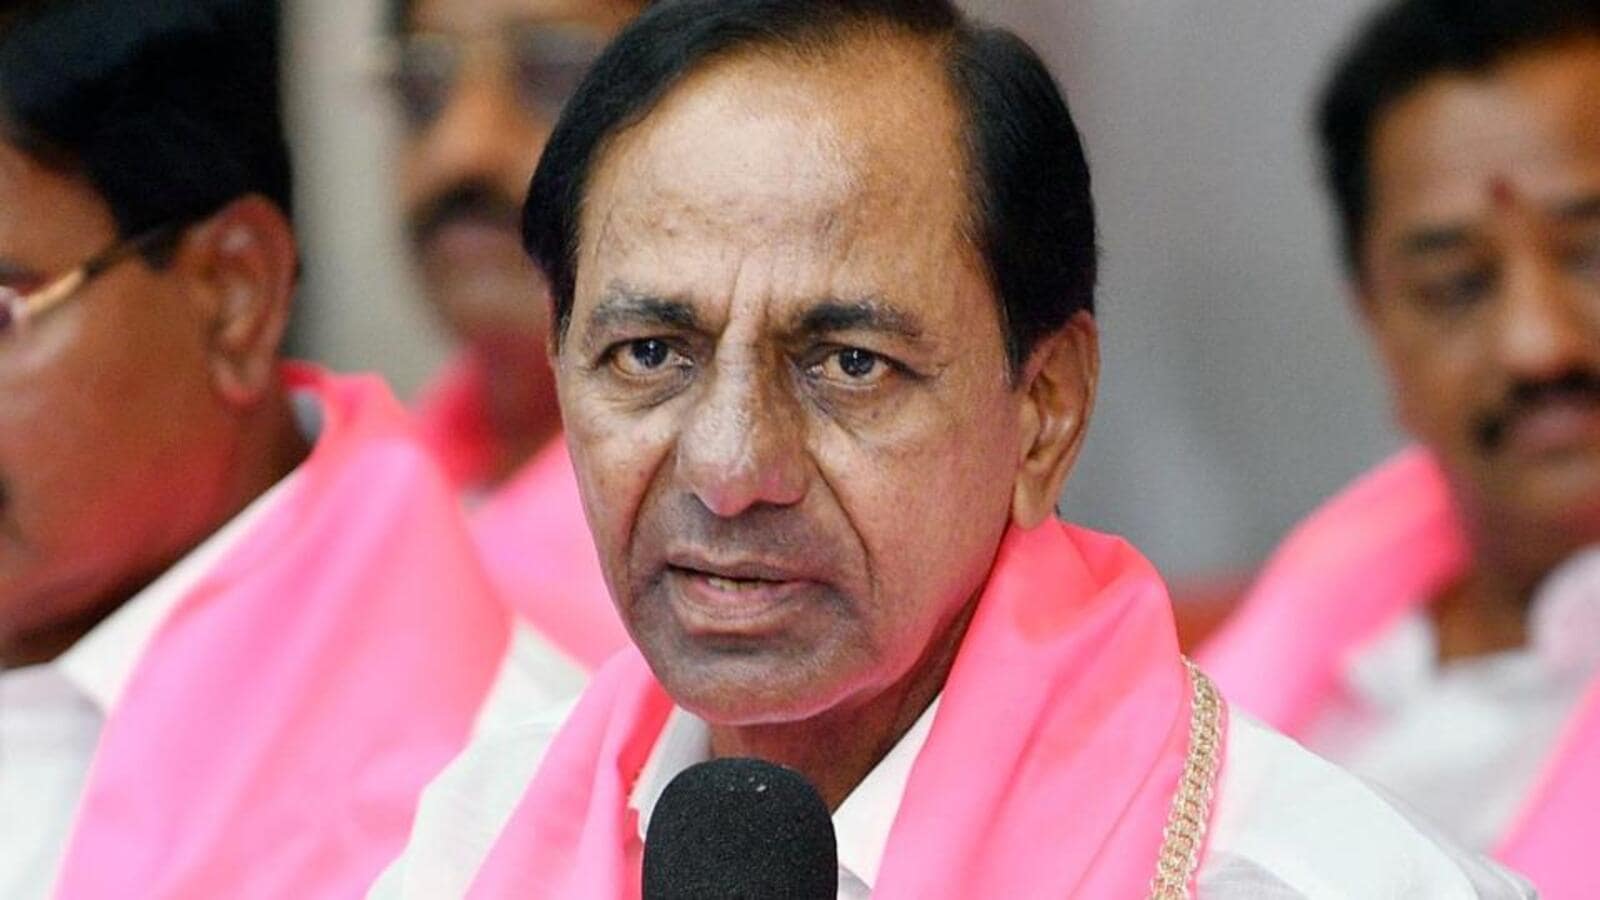 Centre says 'unwell' KCR stayed away from Modi events, rejects KTR's  allegation | Latest News India - Hindustan Times